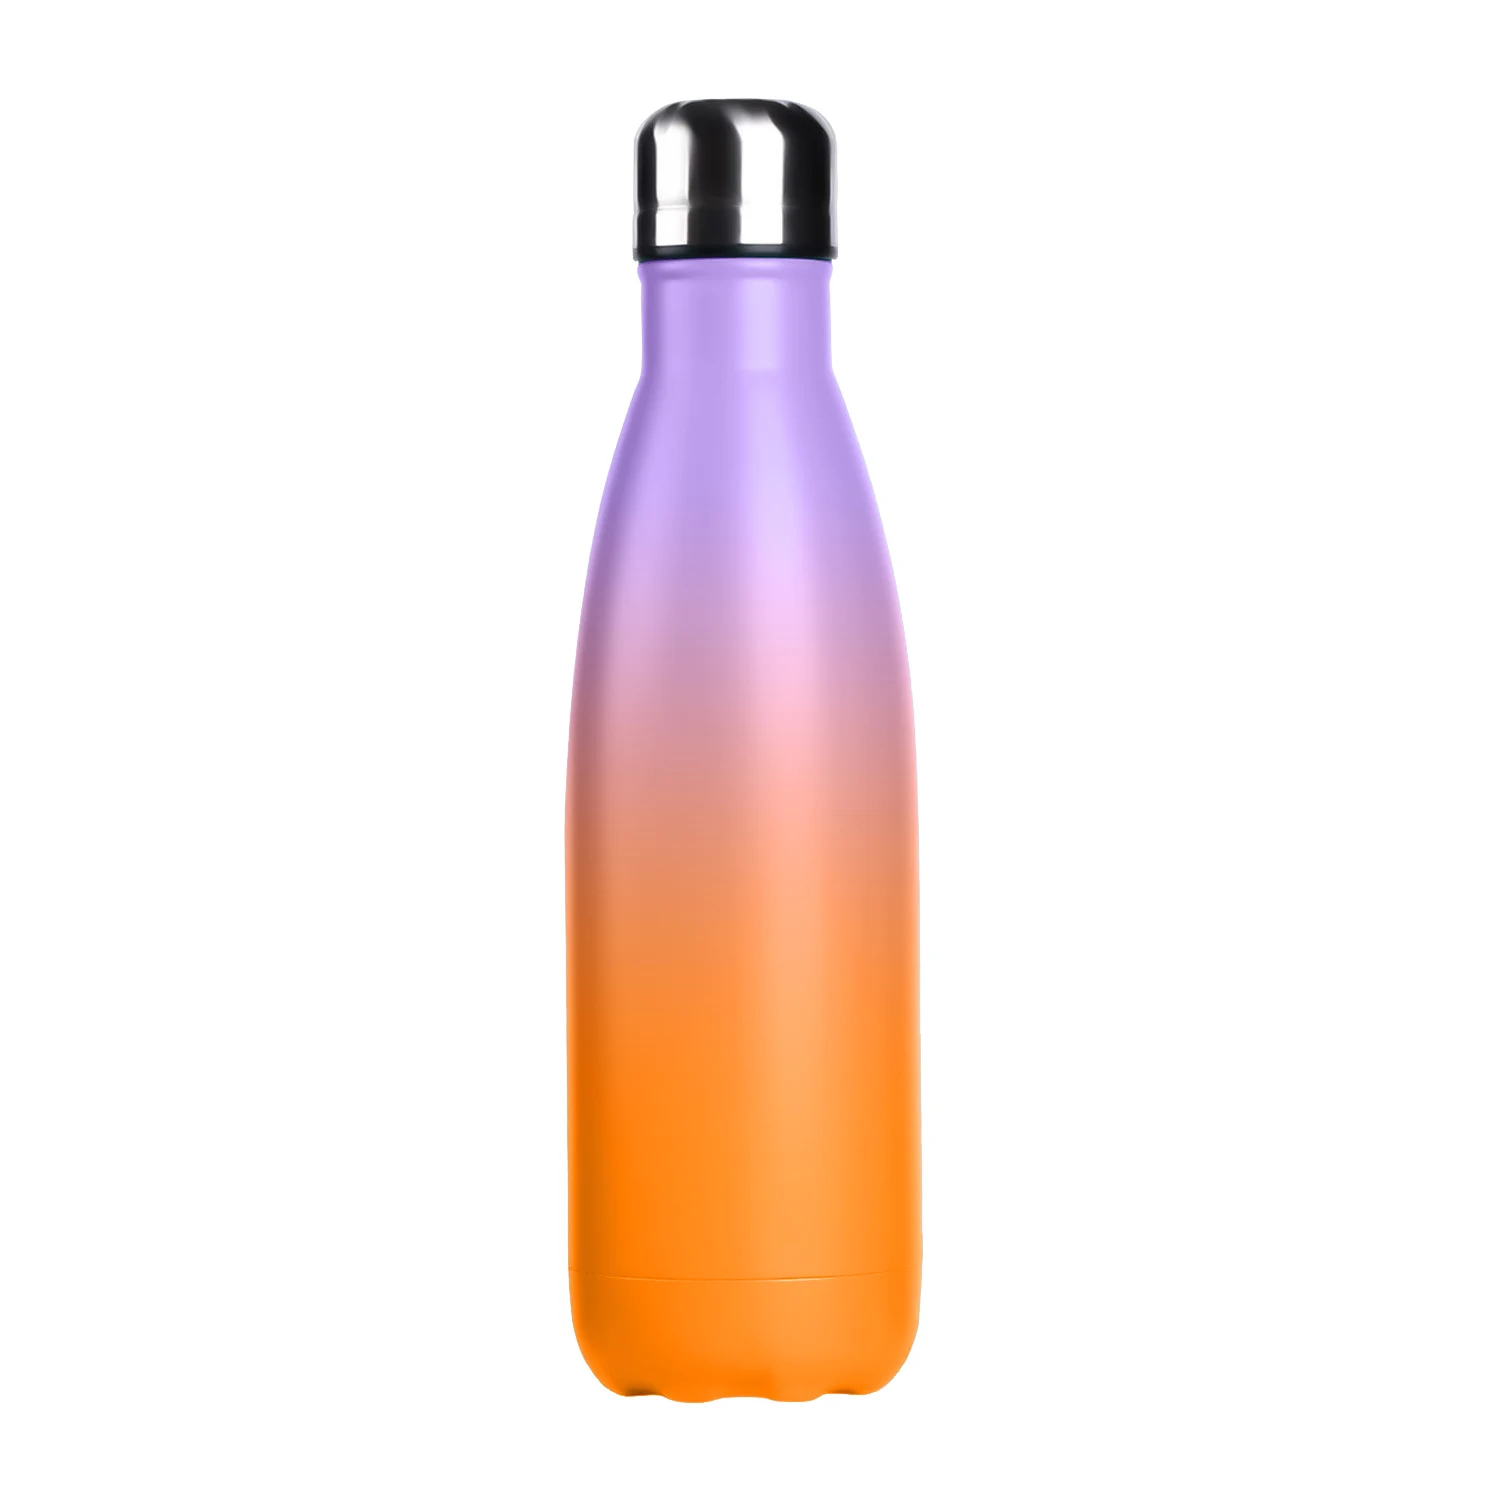 

2022 New Insulated Double Wall Stainless Steel Sports Water Bottle Thermal Keeps Hot or Cold Cola Shape Vacuum Flask, Customized